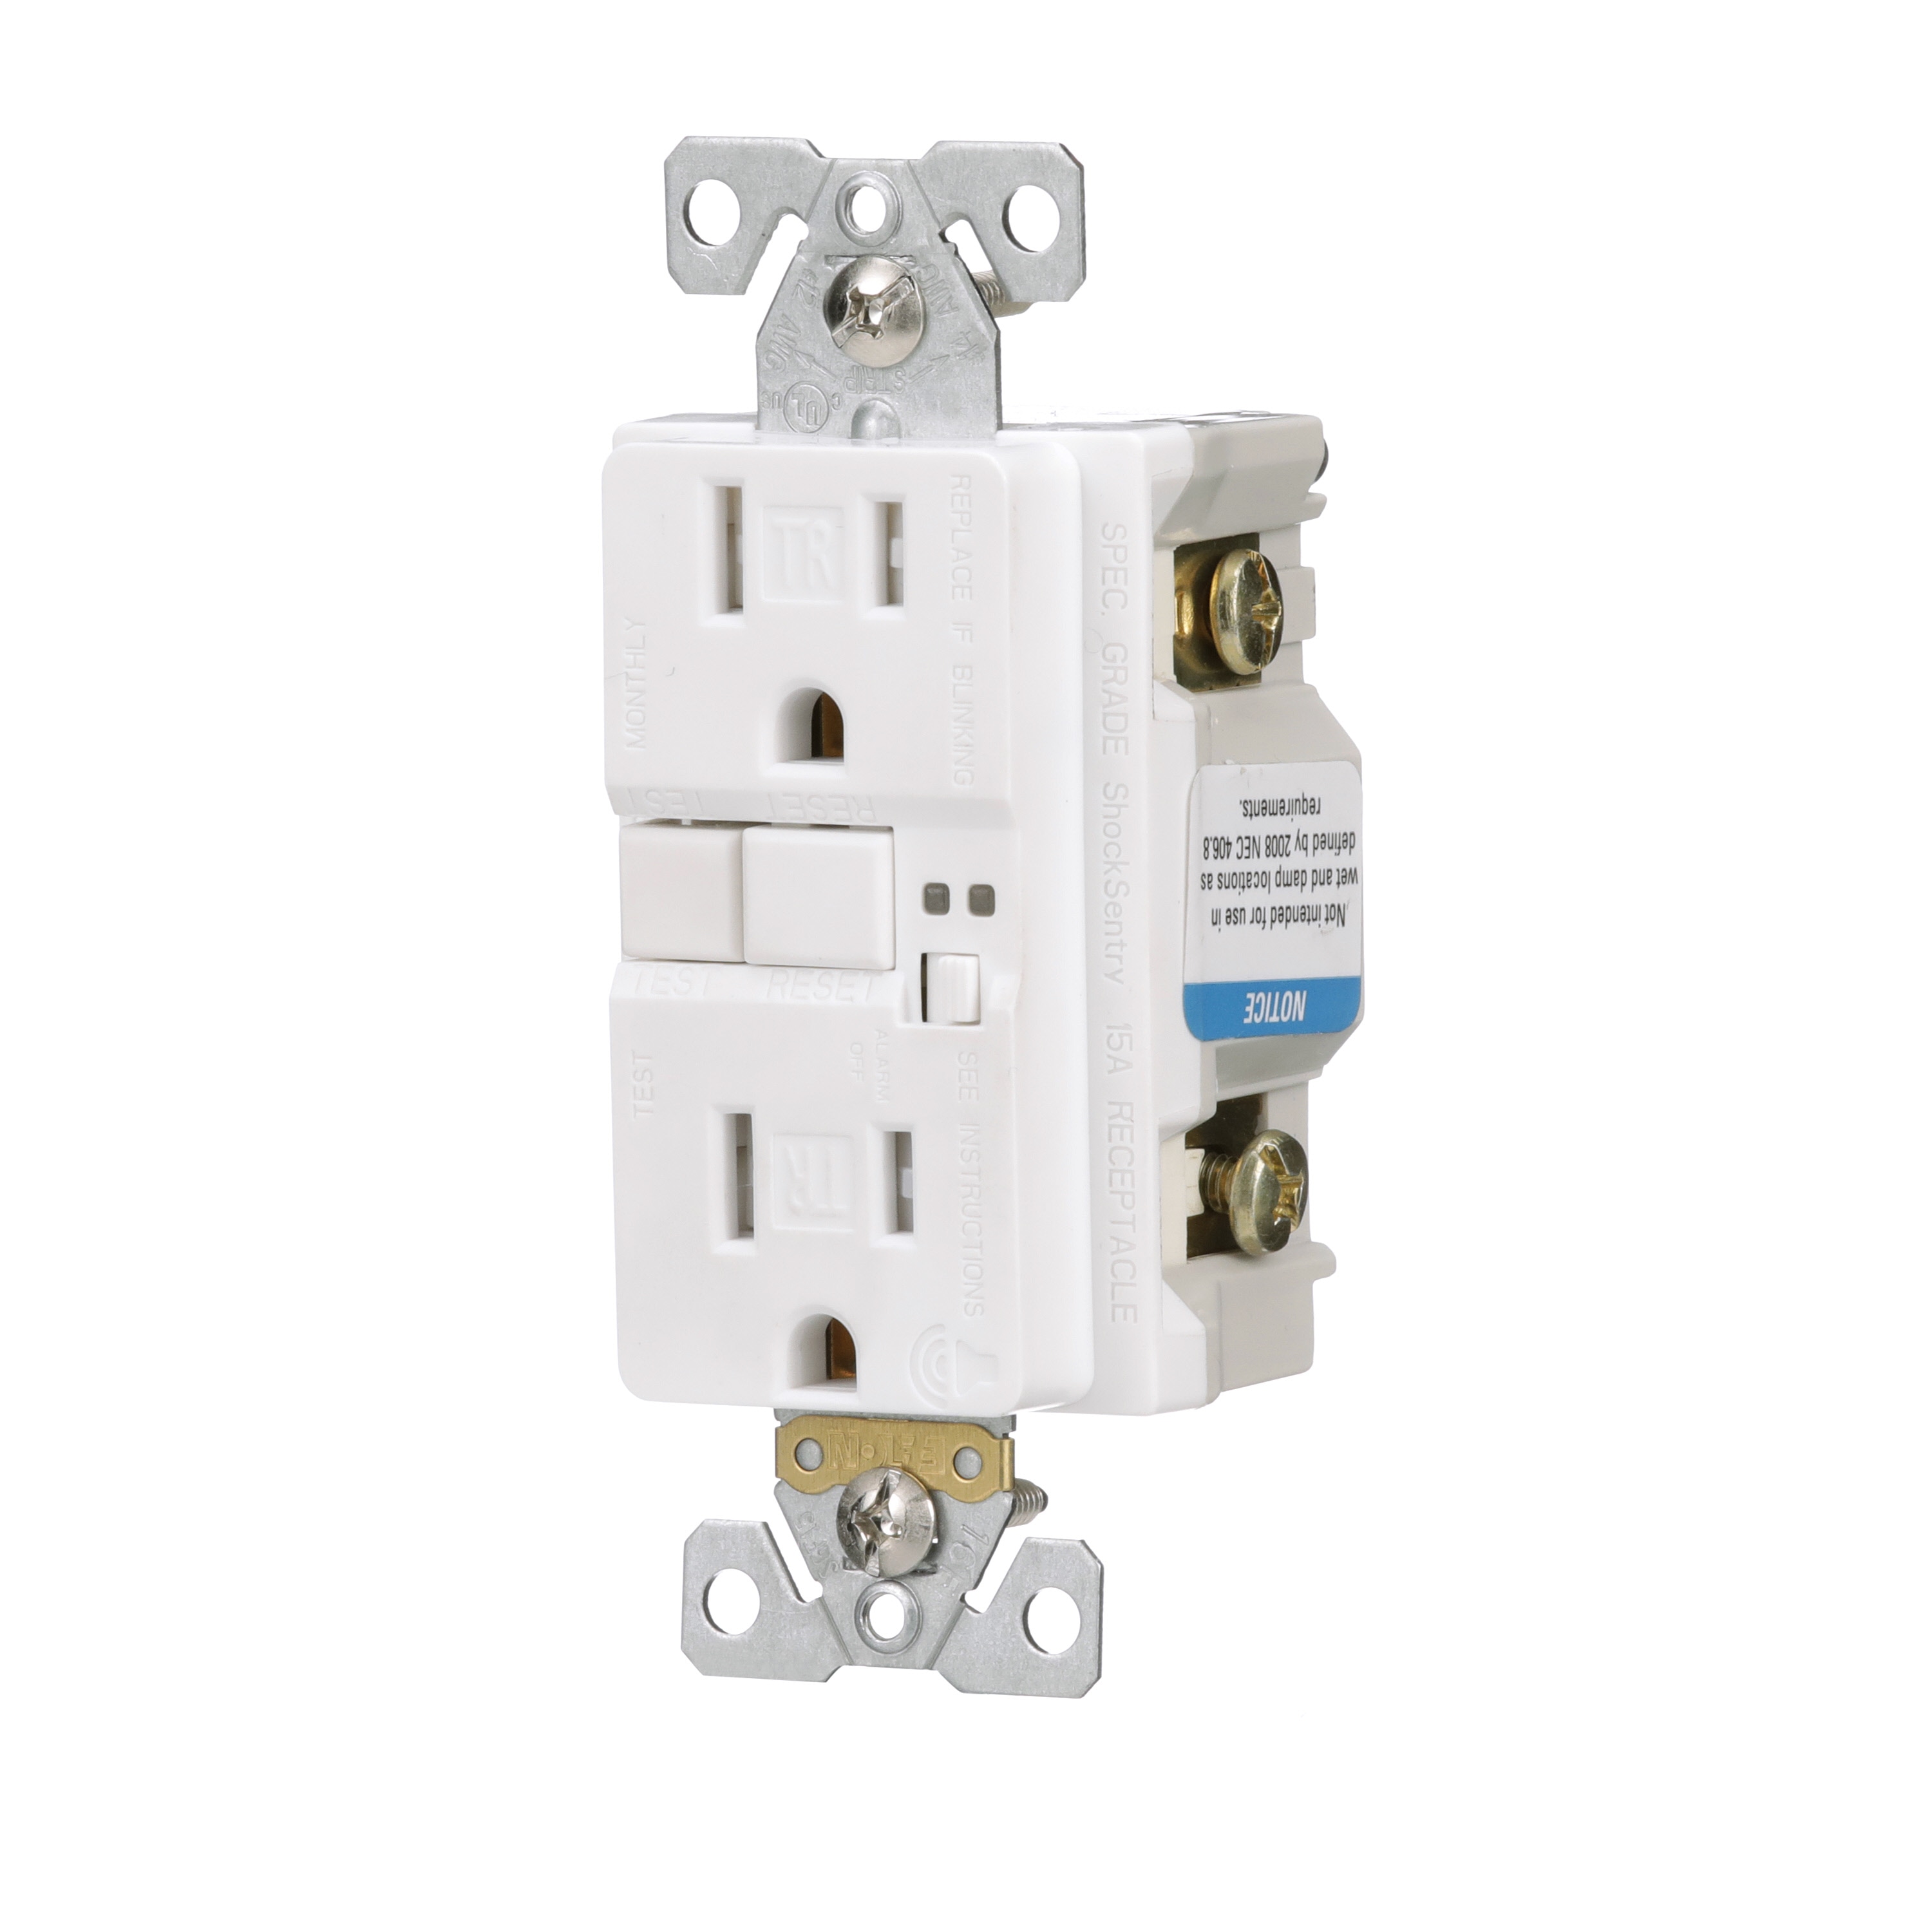 c&g outdoors 15 Amps Tamper Resistant Outlet